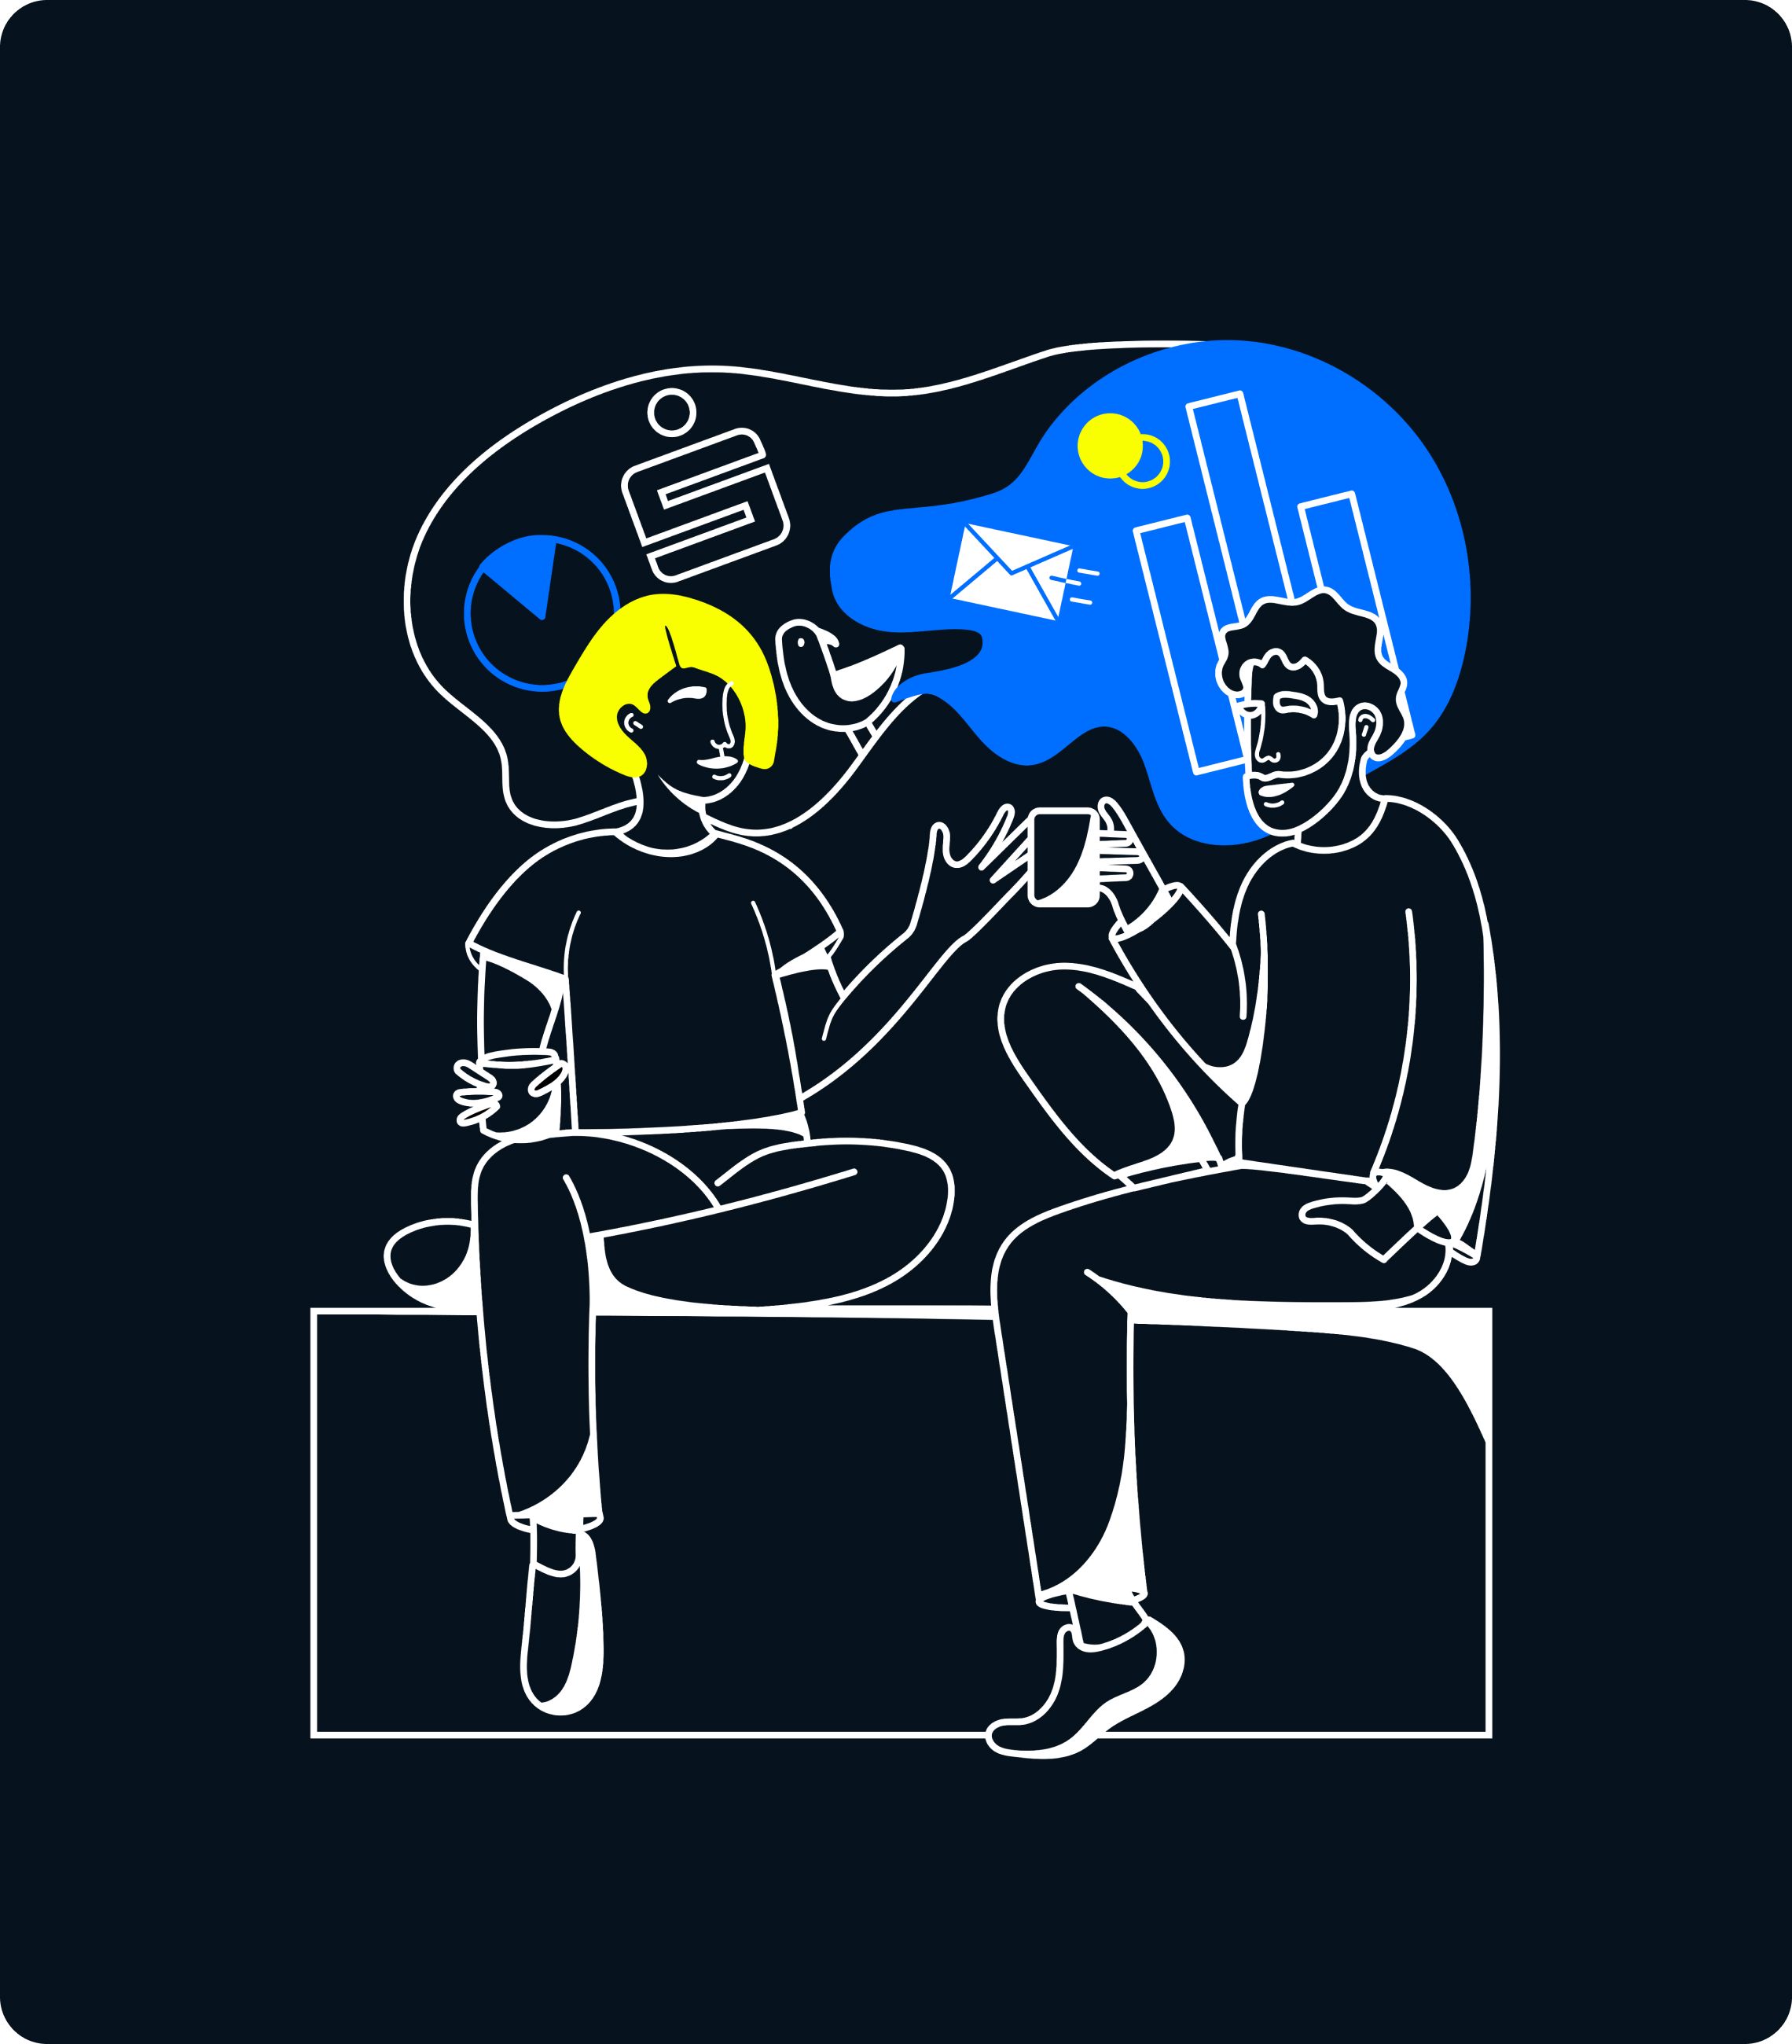 Dark illustration of two people talking about banking.